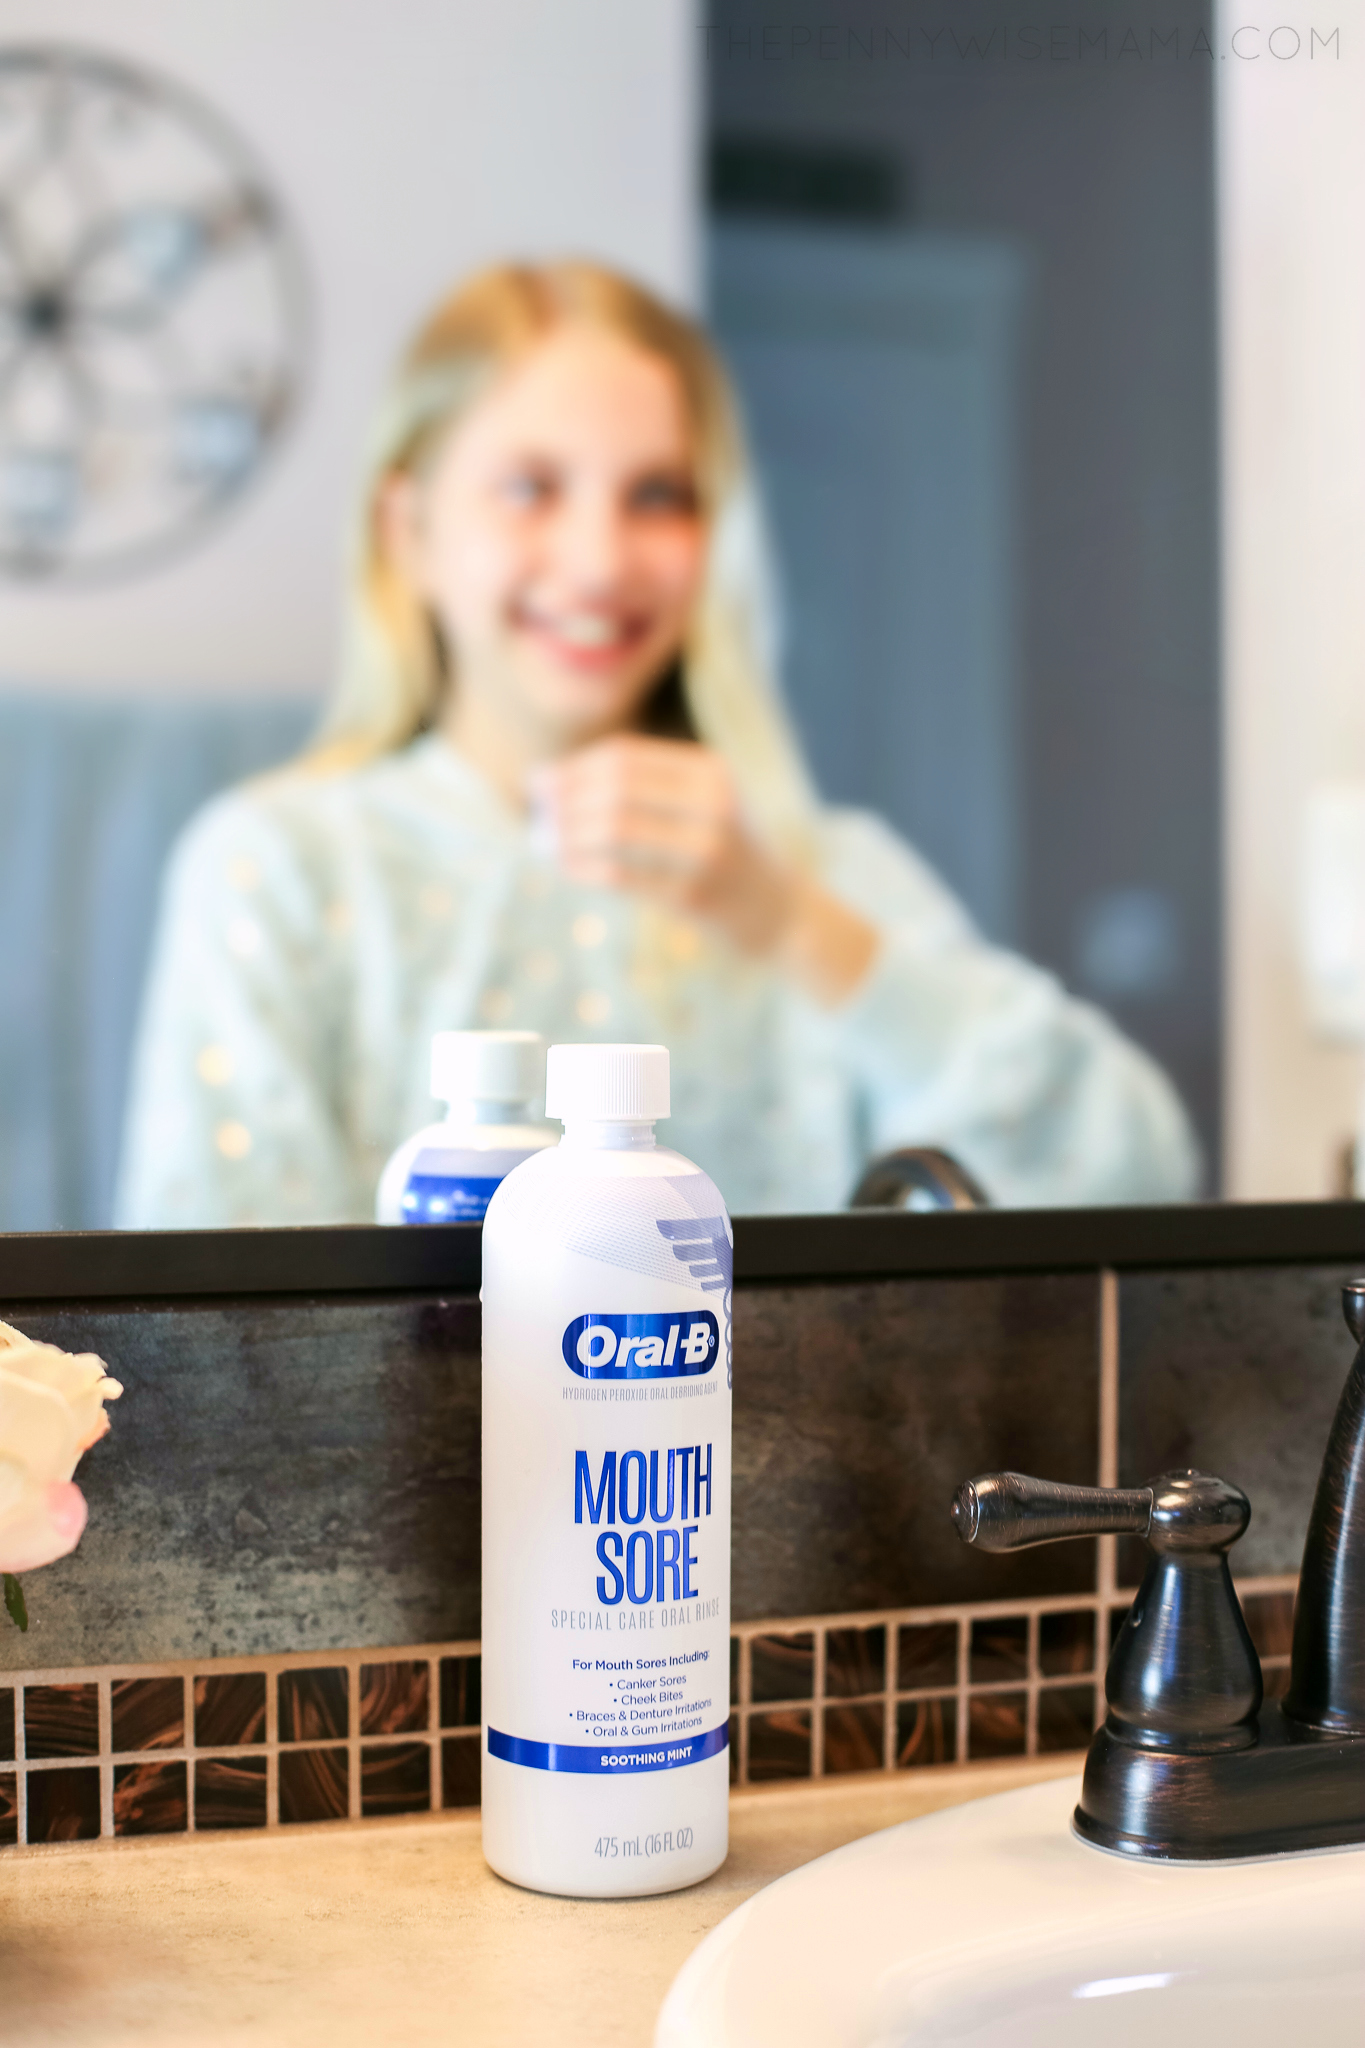 Oral-B Mouth Sore Special Care Rinse